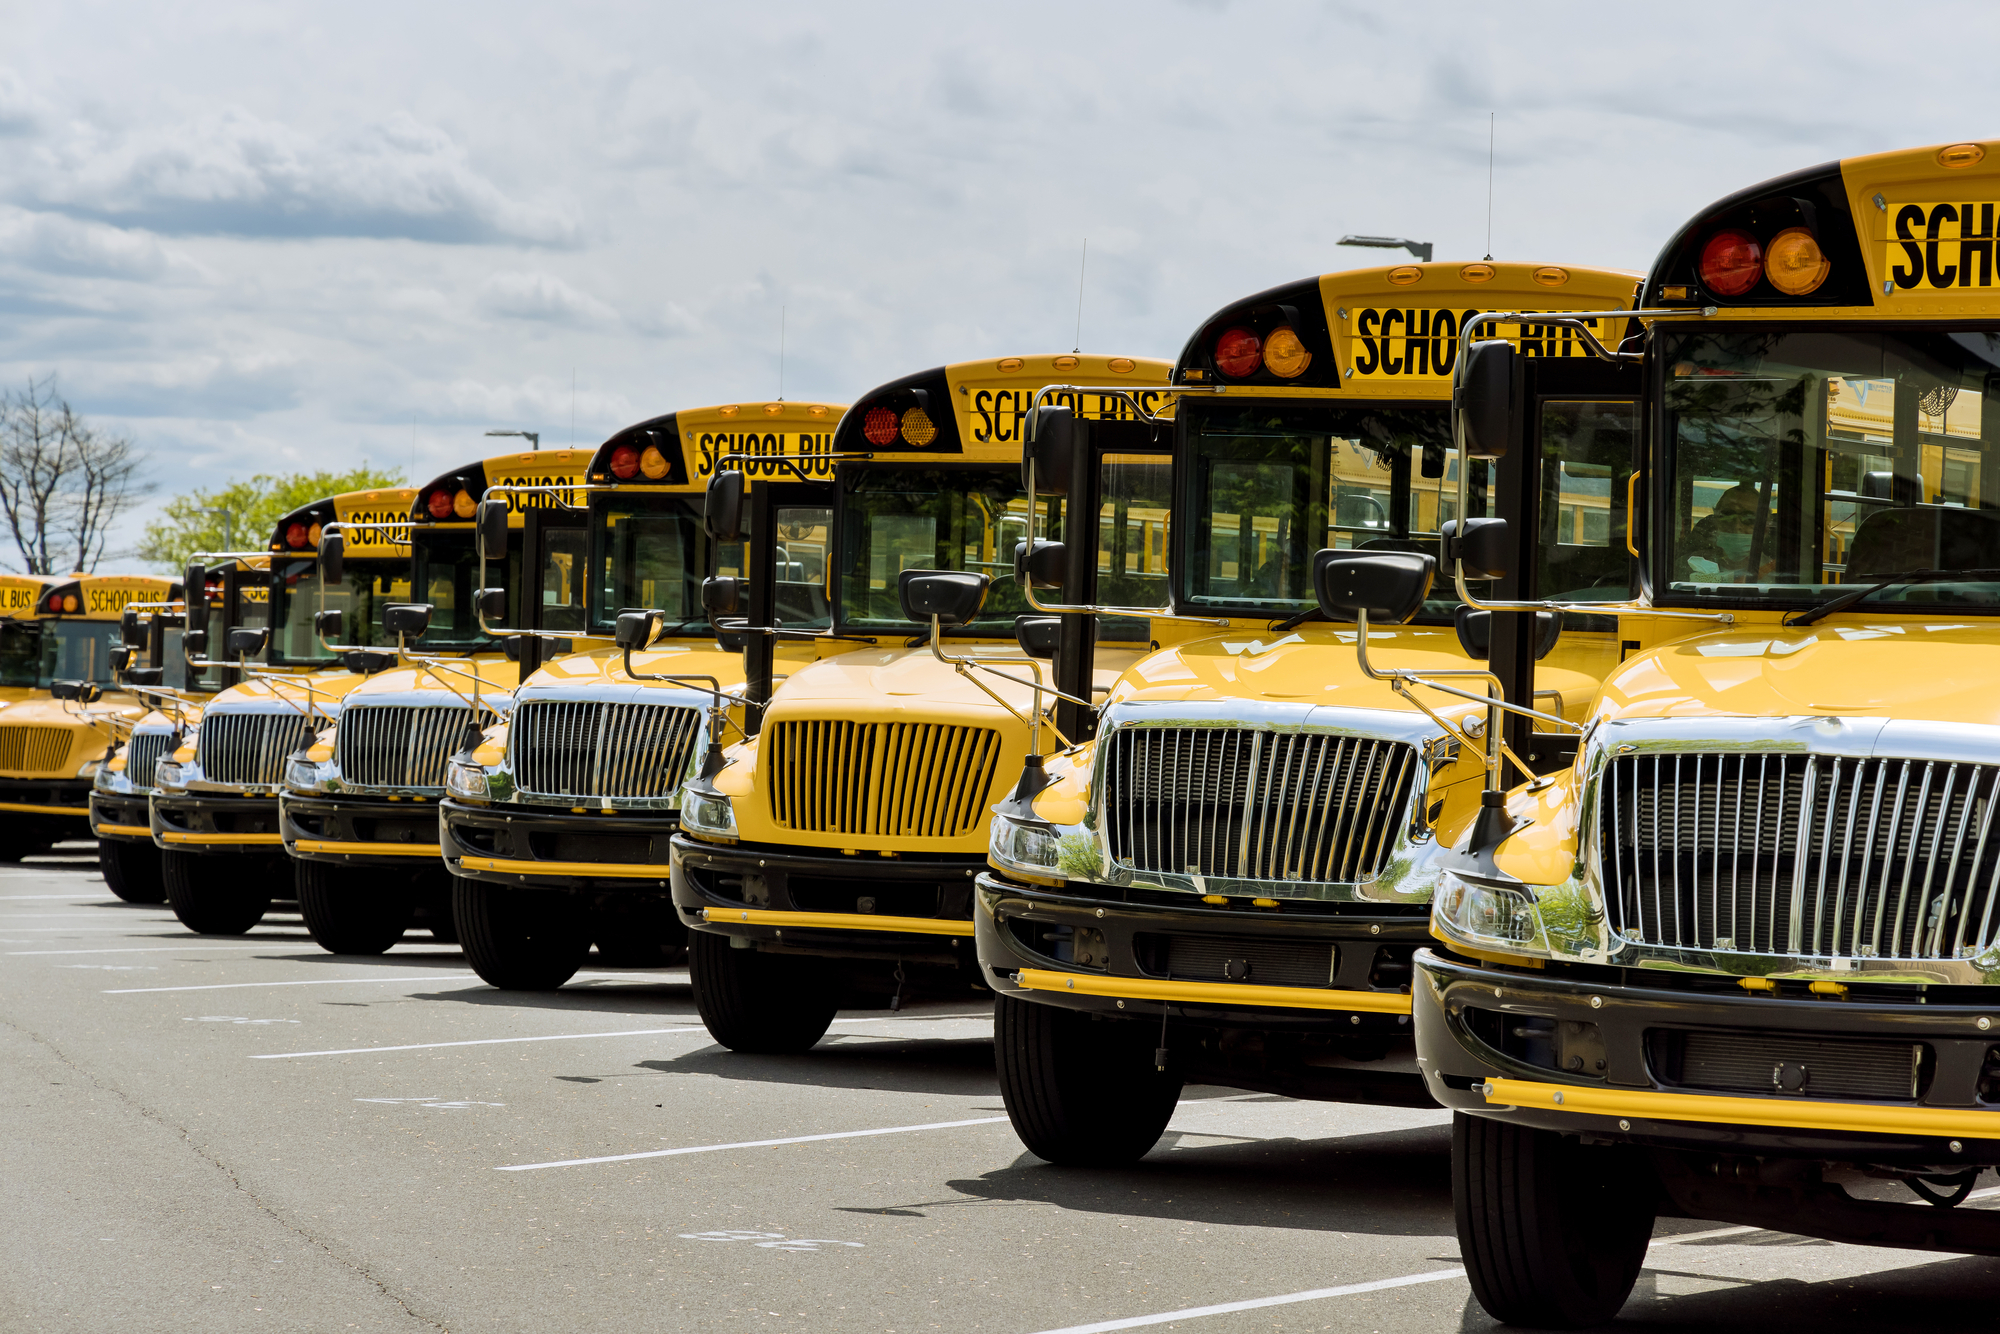 View the yellow school buses parked near the high school